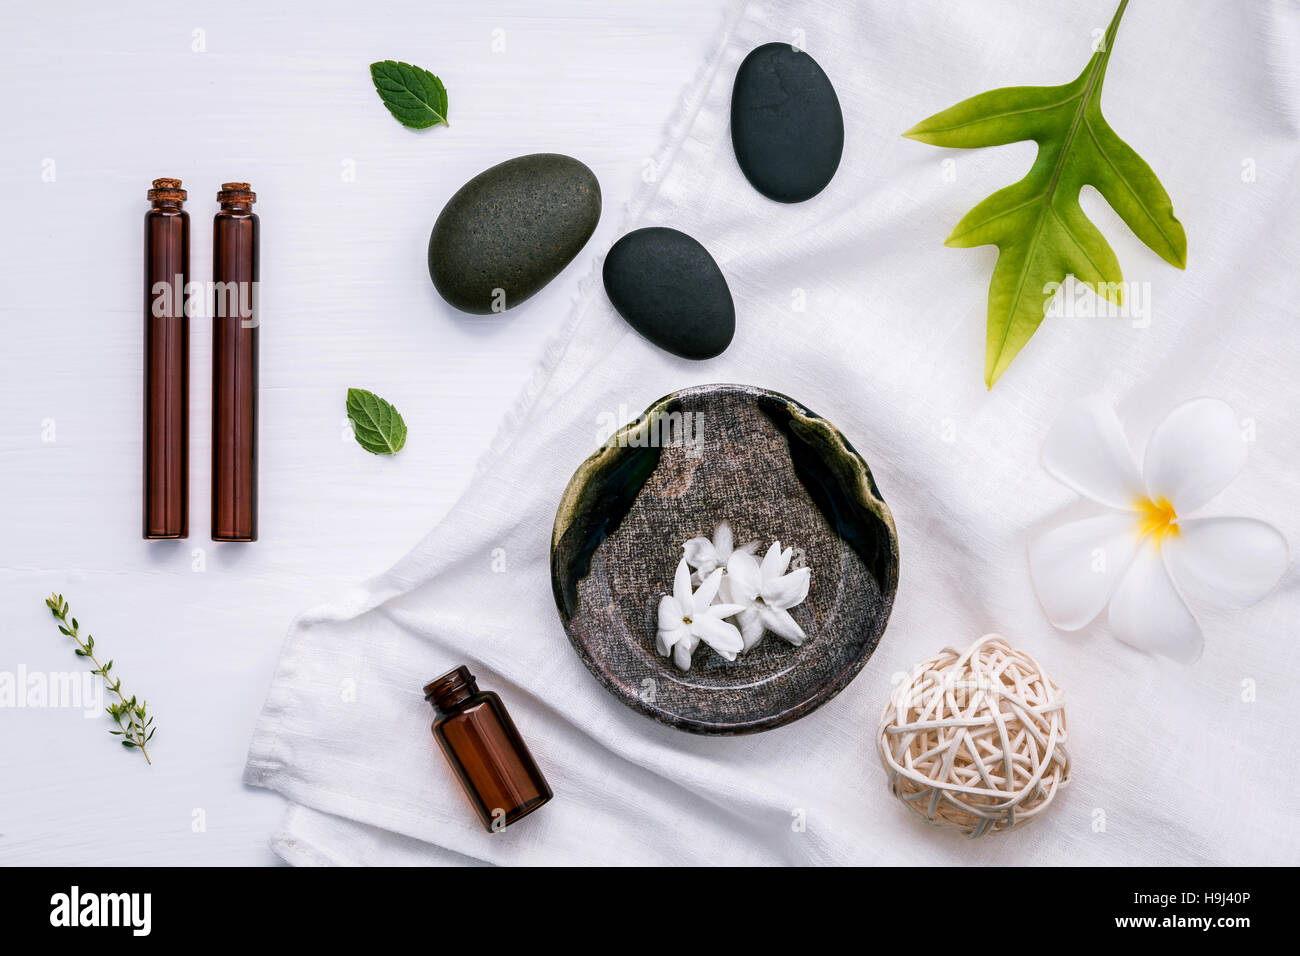 Alternative medicine and aromatherapy bottle of essential oil wi Stock Photo